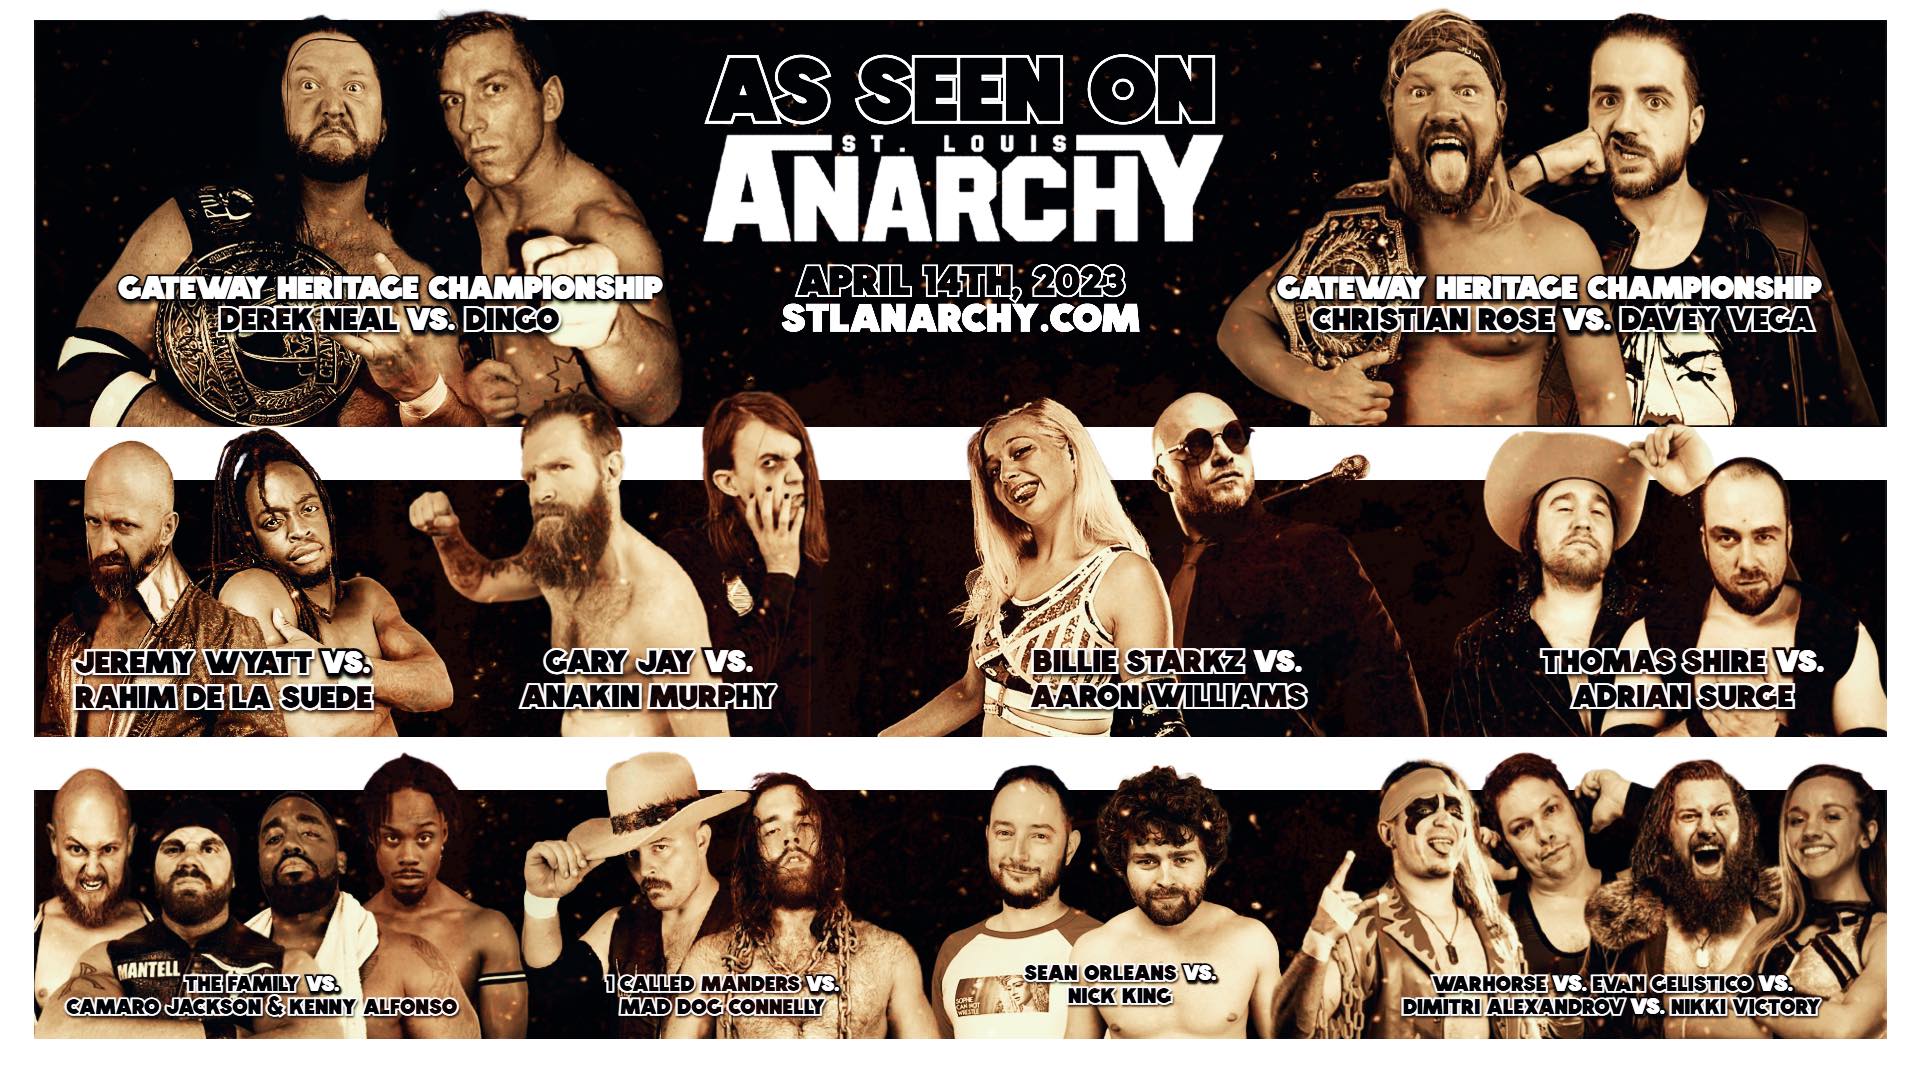 Preview: St. Louis Anarchy - Gateway to Anarchy (1/10/20)